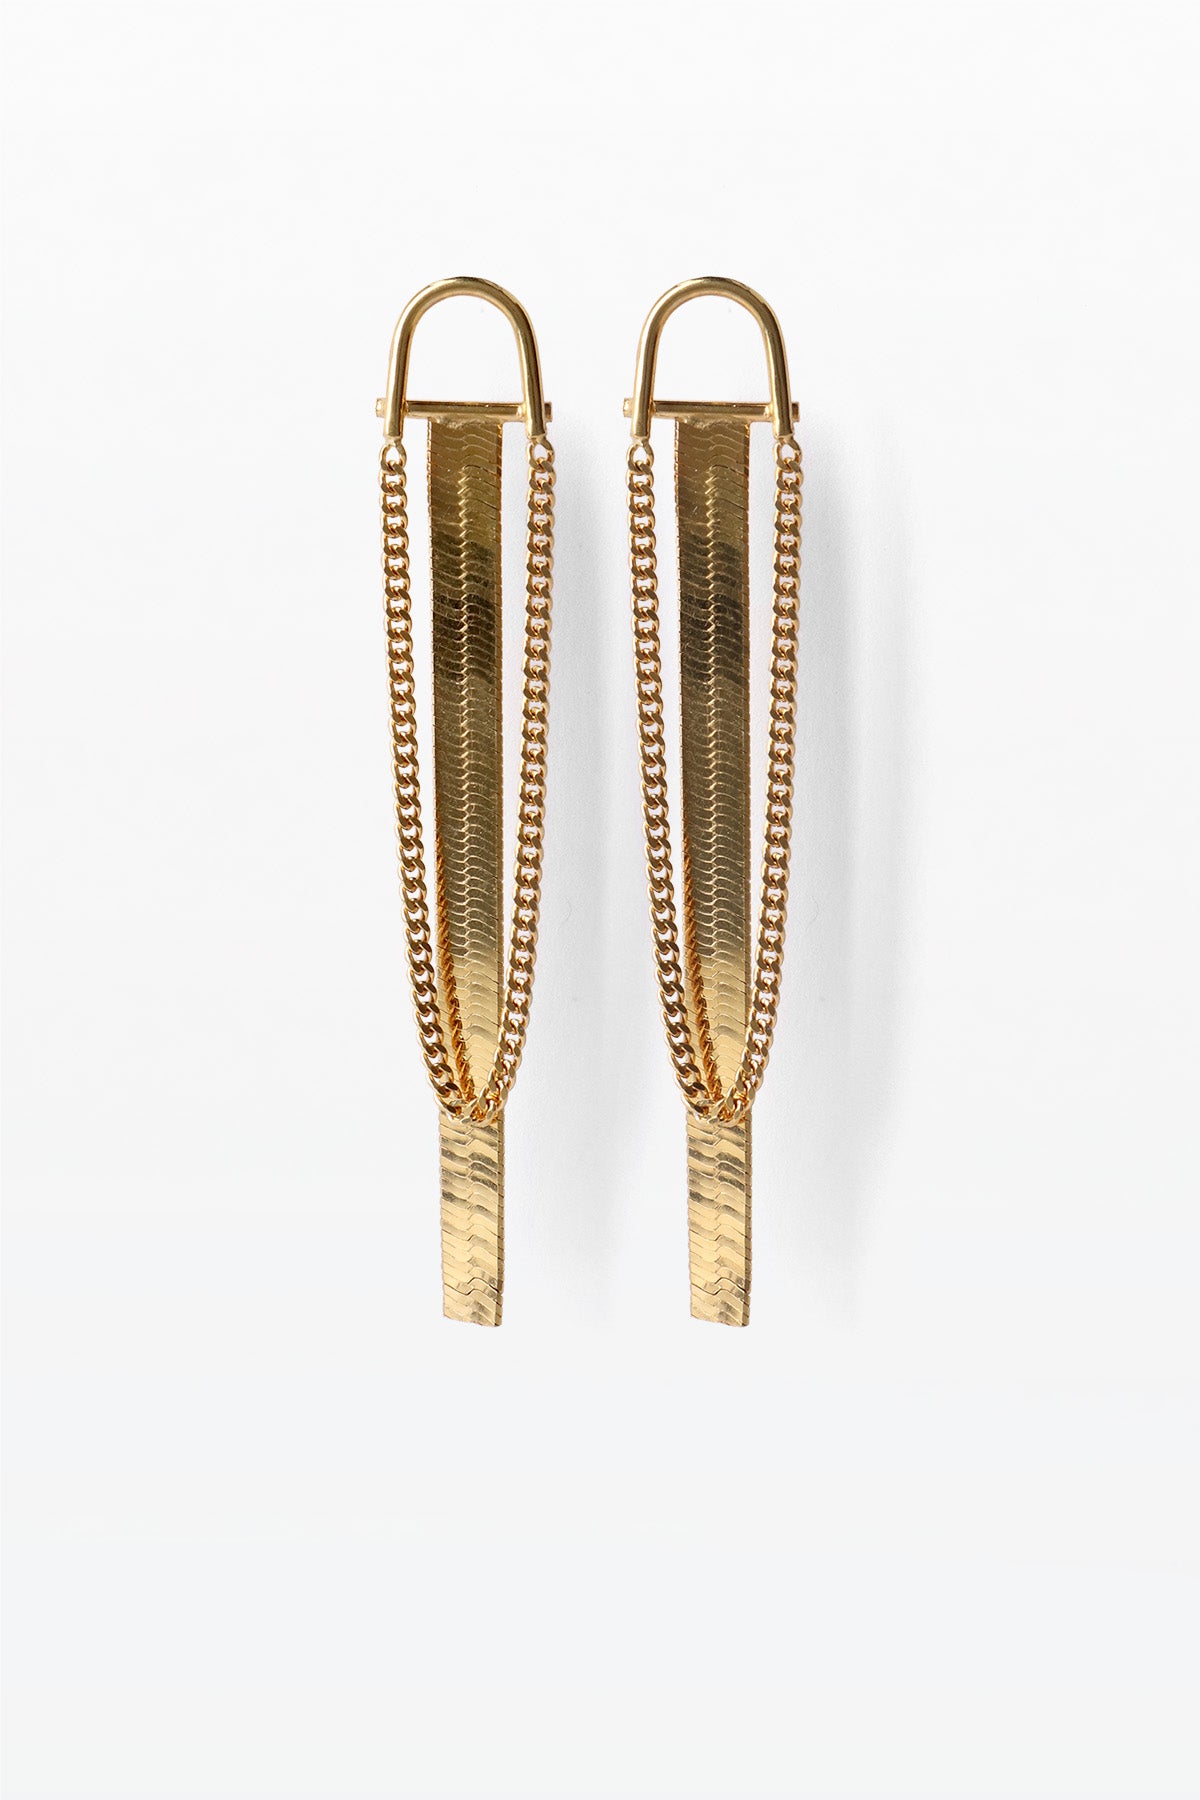 Forma Earring 03 Gold Plated Silver